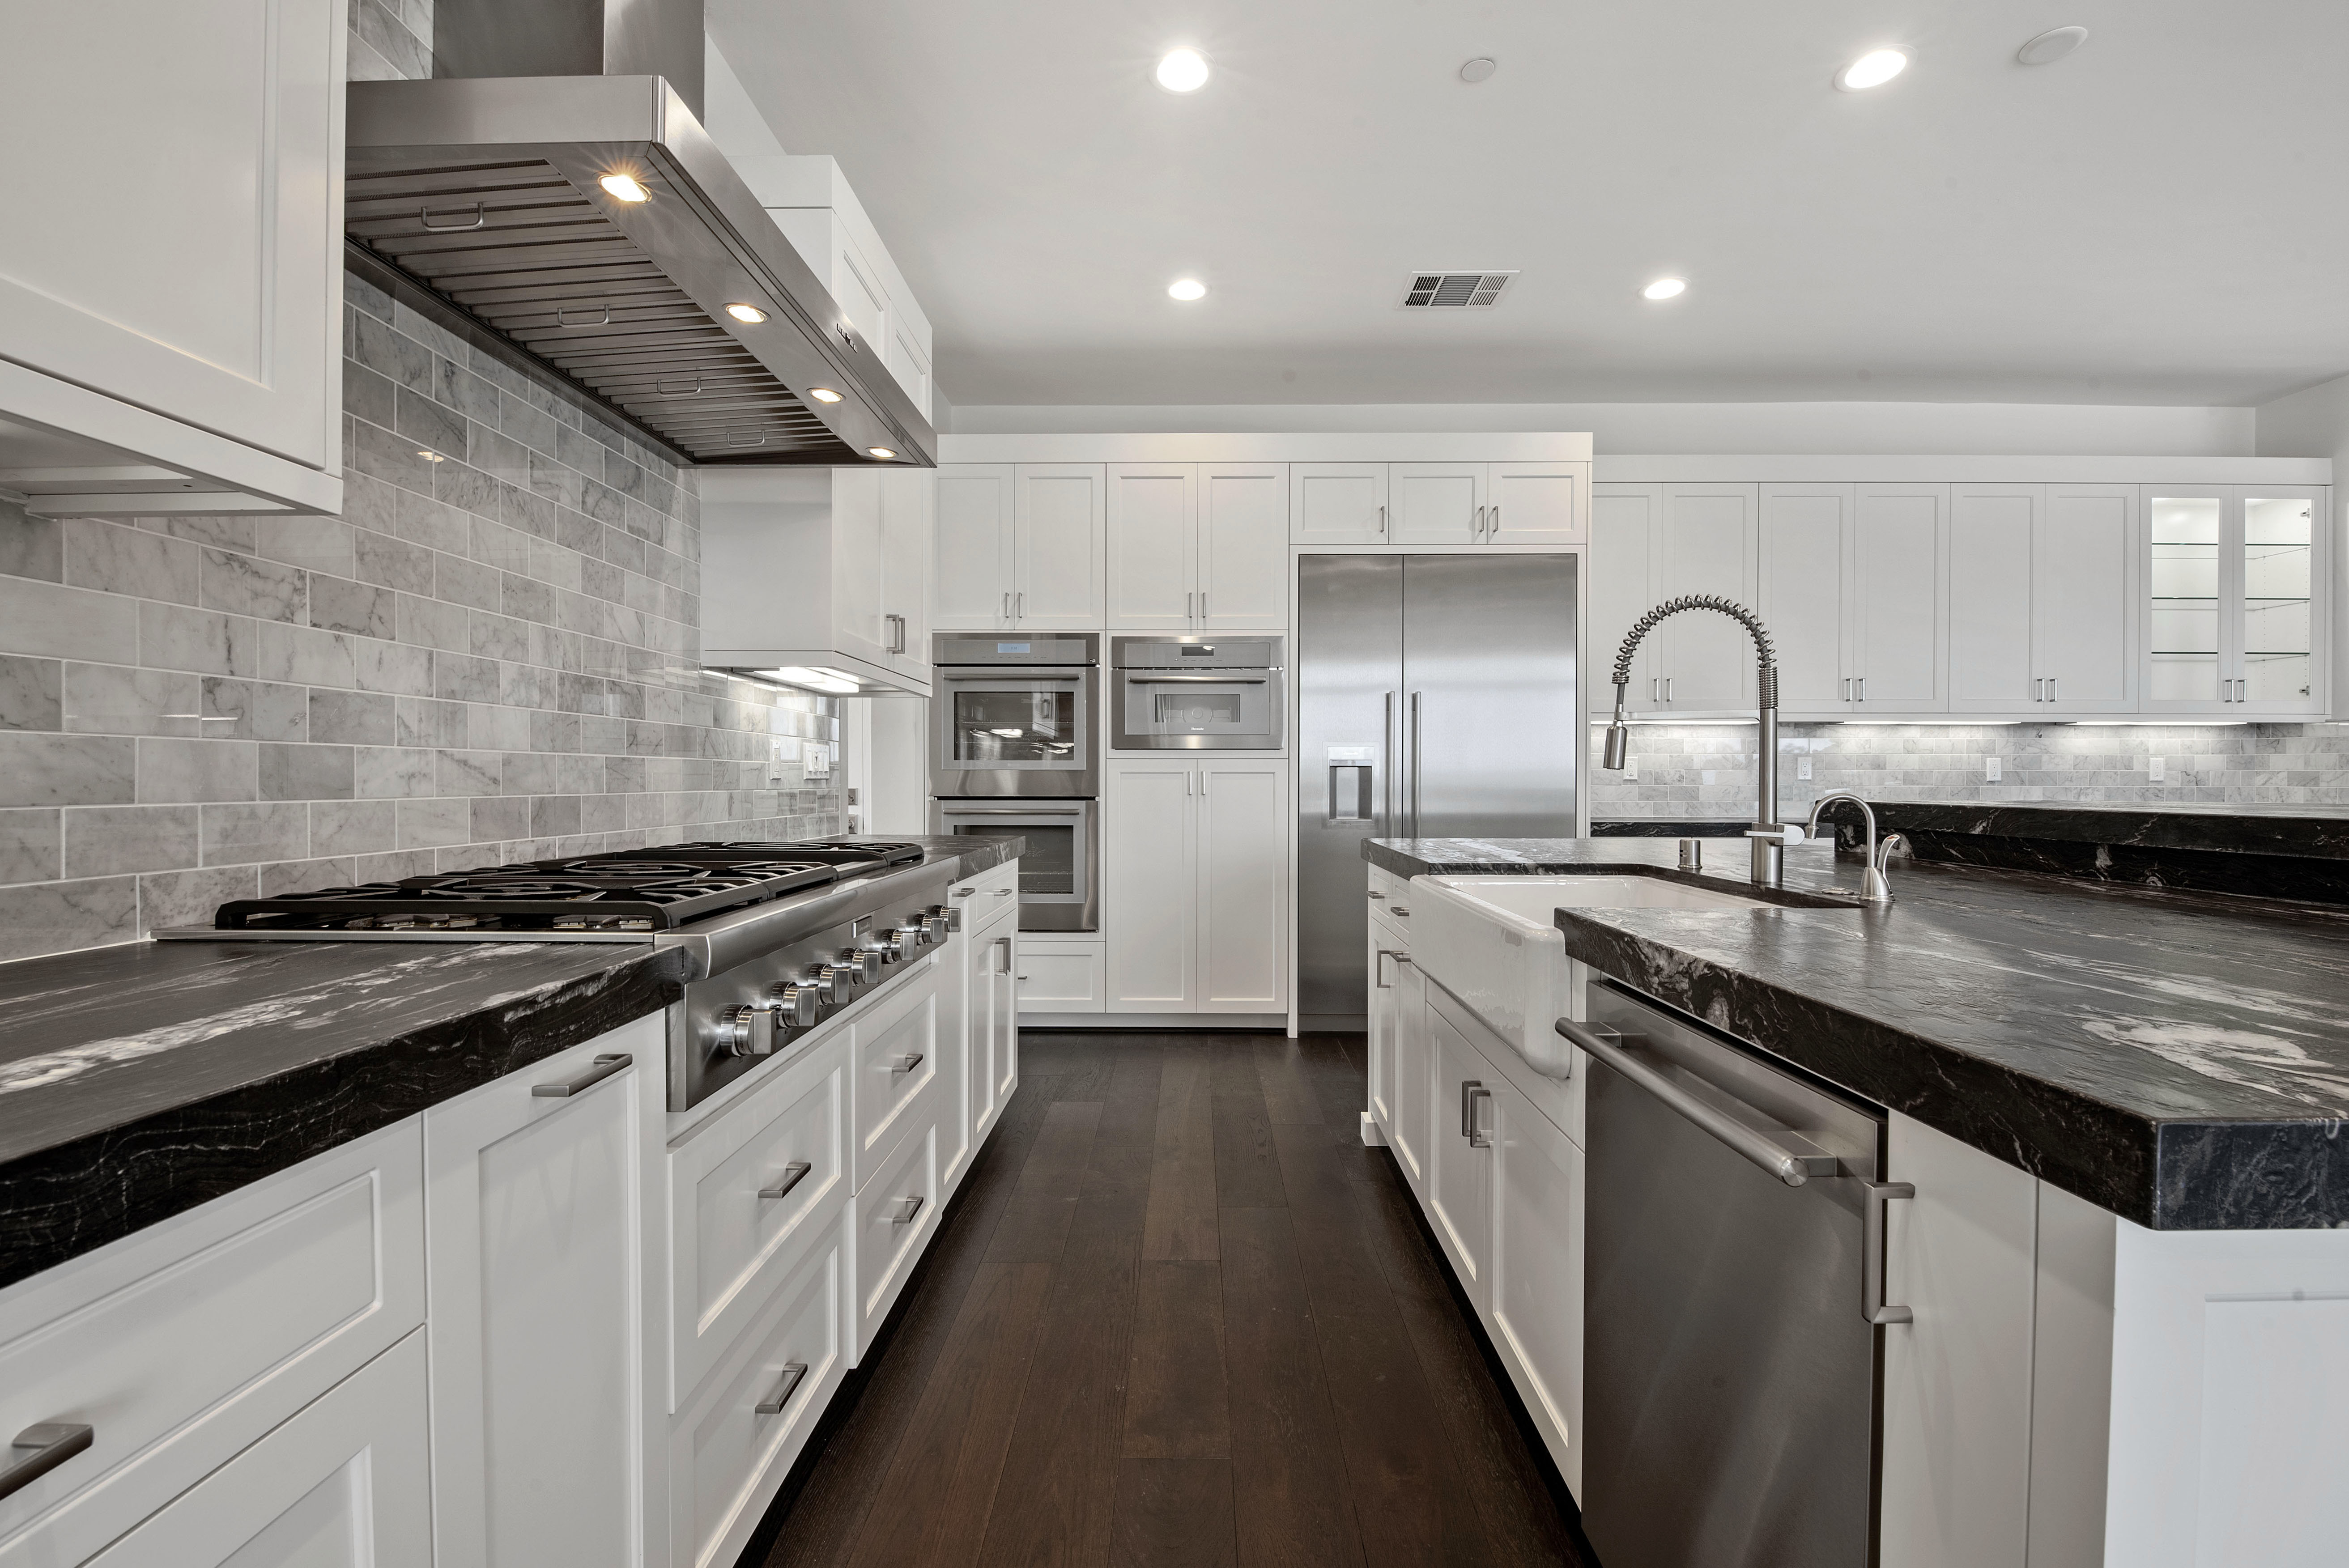 Kitchen Cabinets and countertops | Elite Builder Services